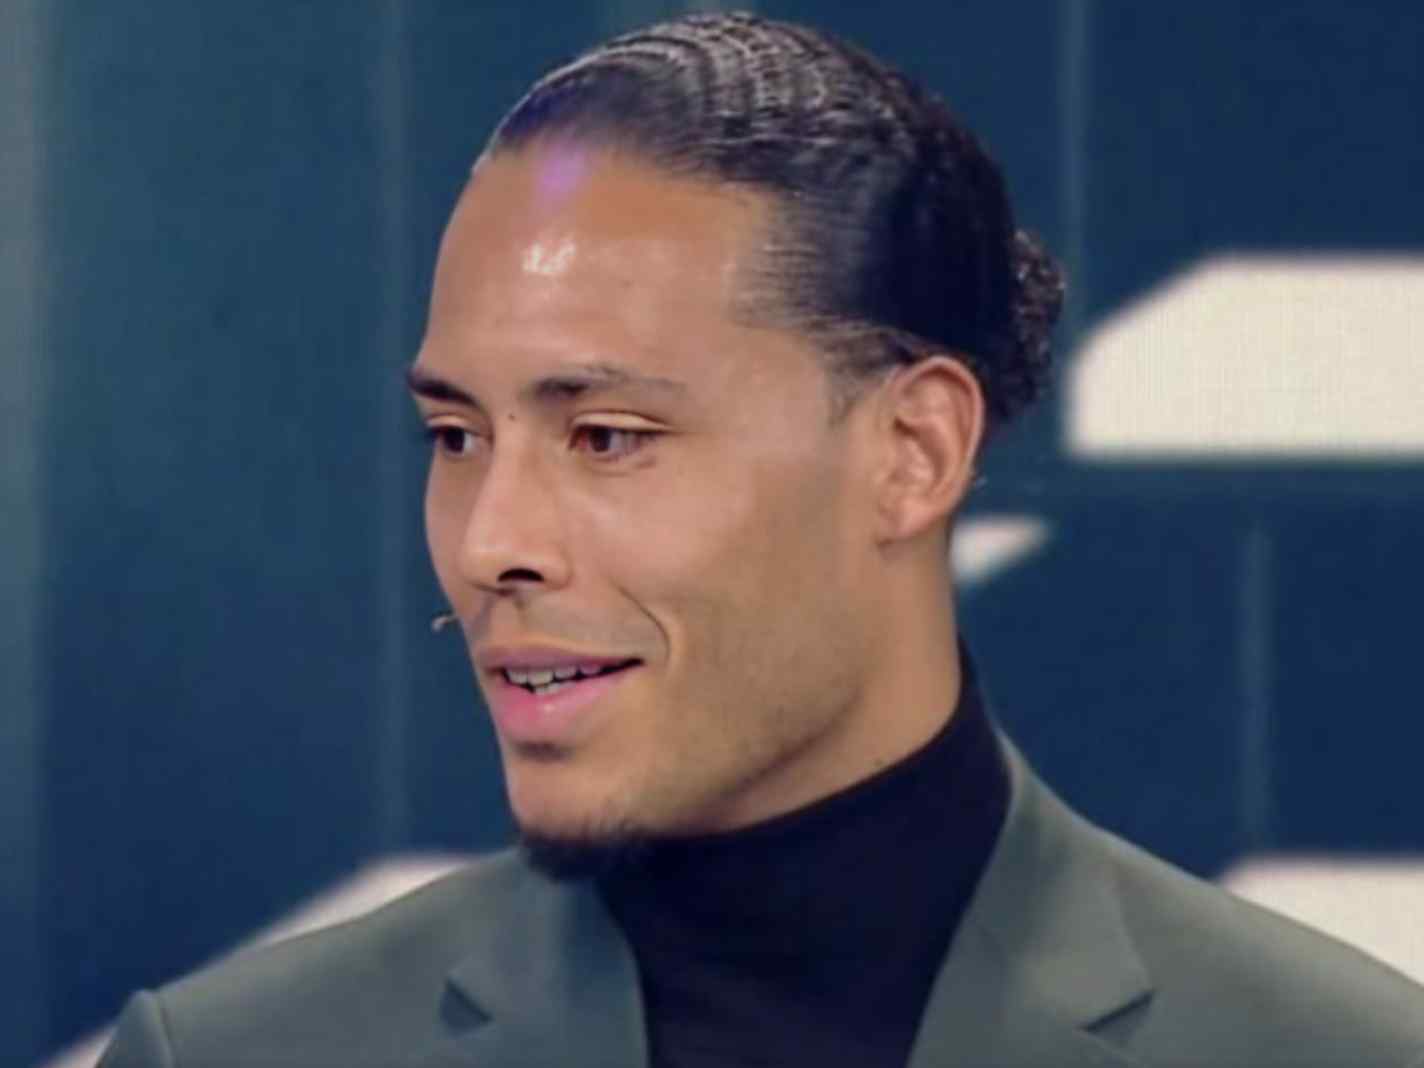 Look: Virgil van Dijk makes rare appearance with wife Rike Nooitgedagt at FIFA Best Awards